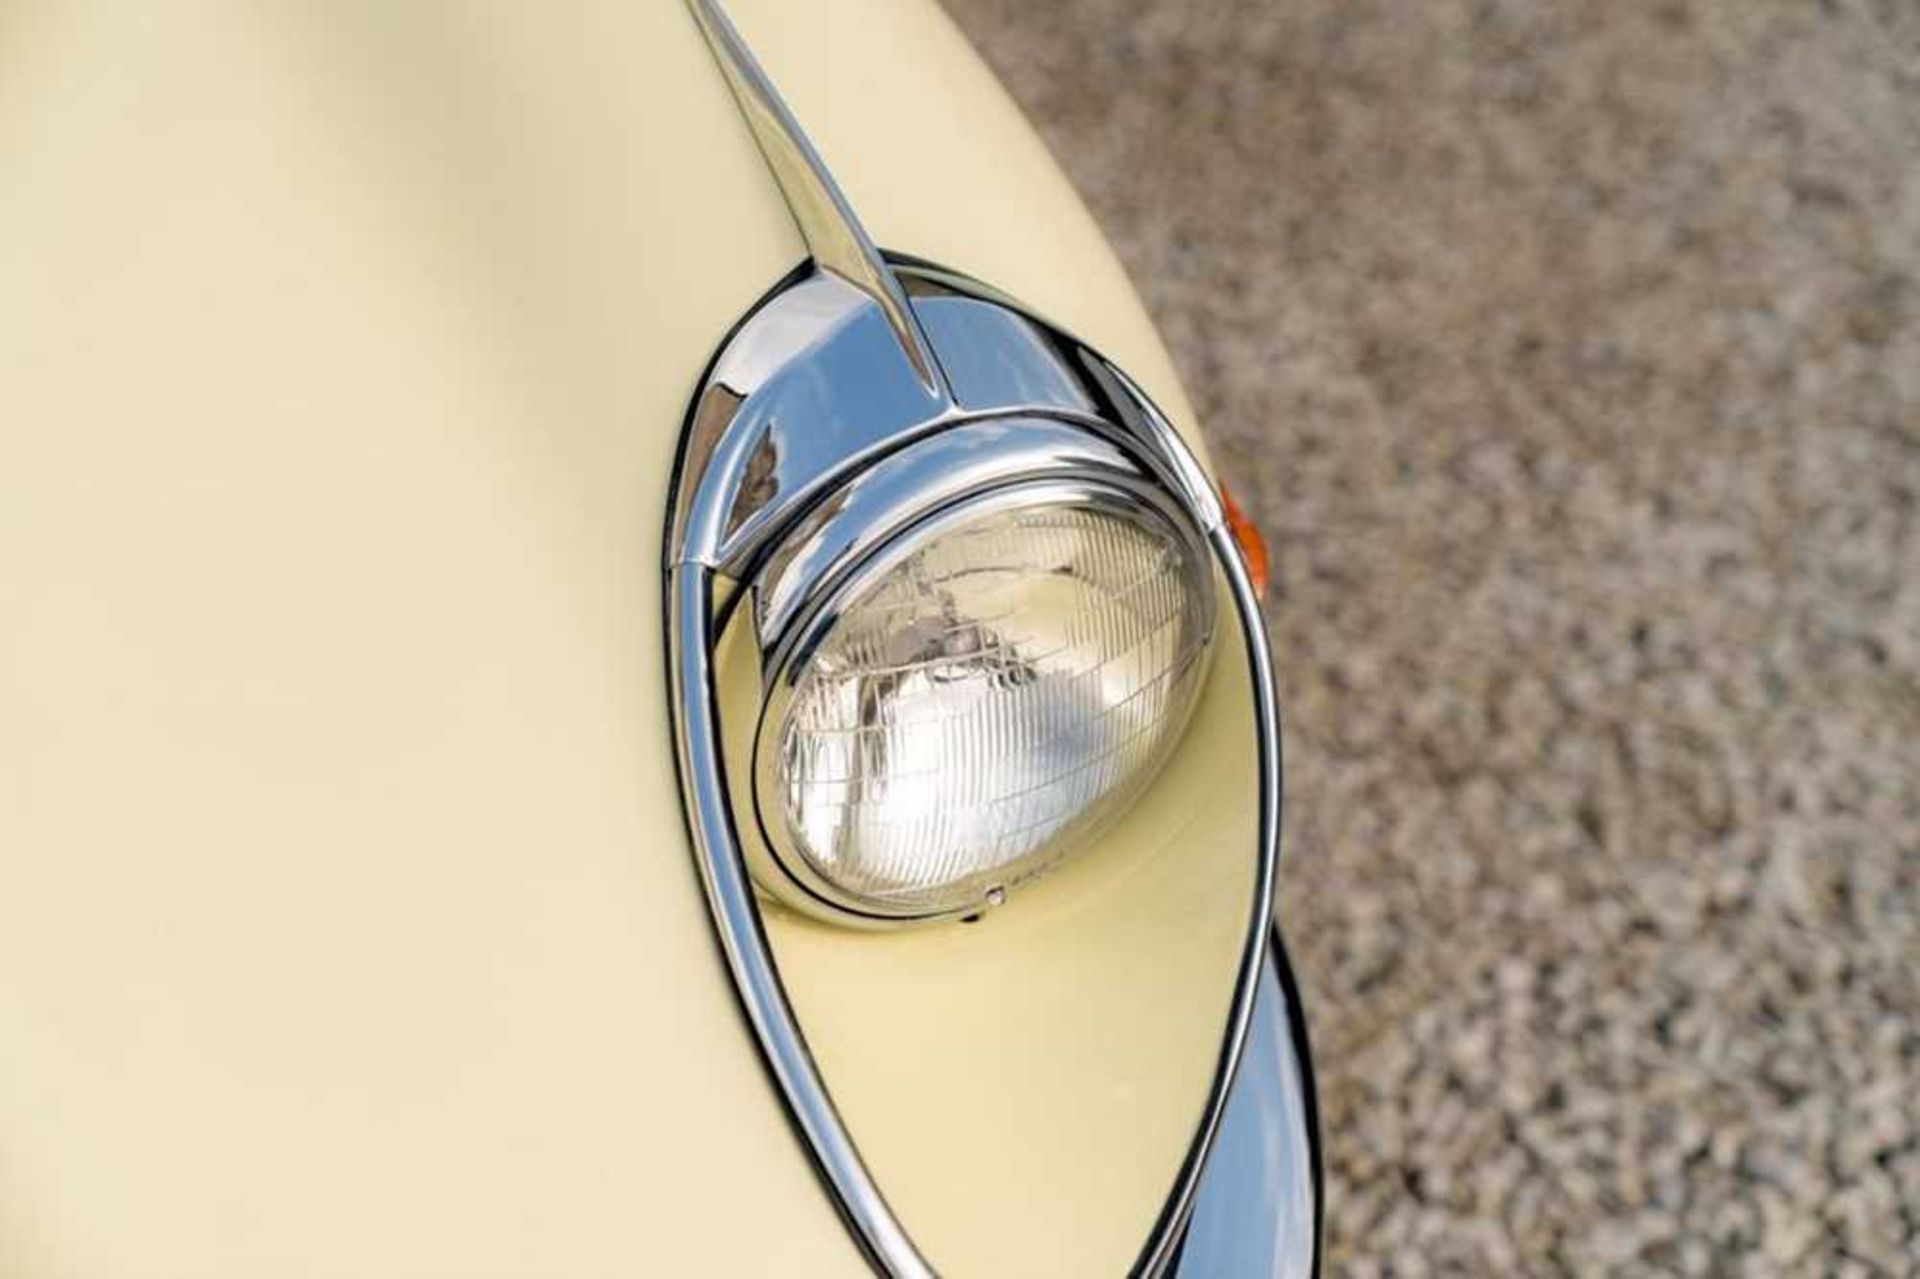 1968 Jaguar E-Type 4.2 Litre Coupe Genuine 44,000 miles from new - Image 63 of 68